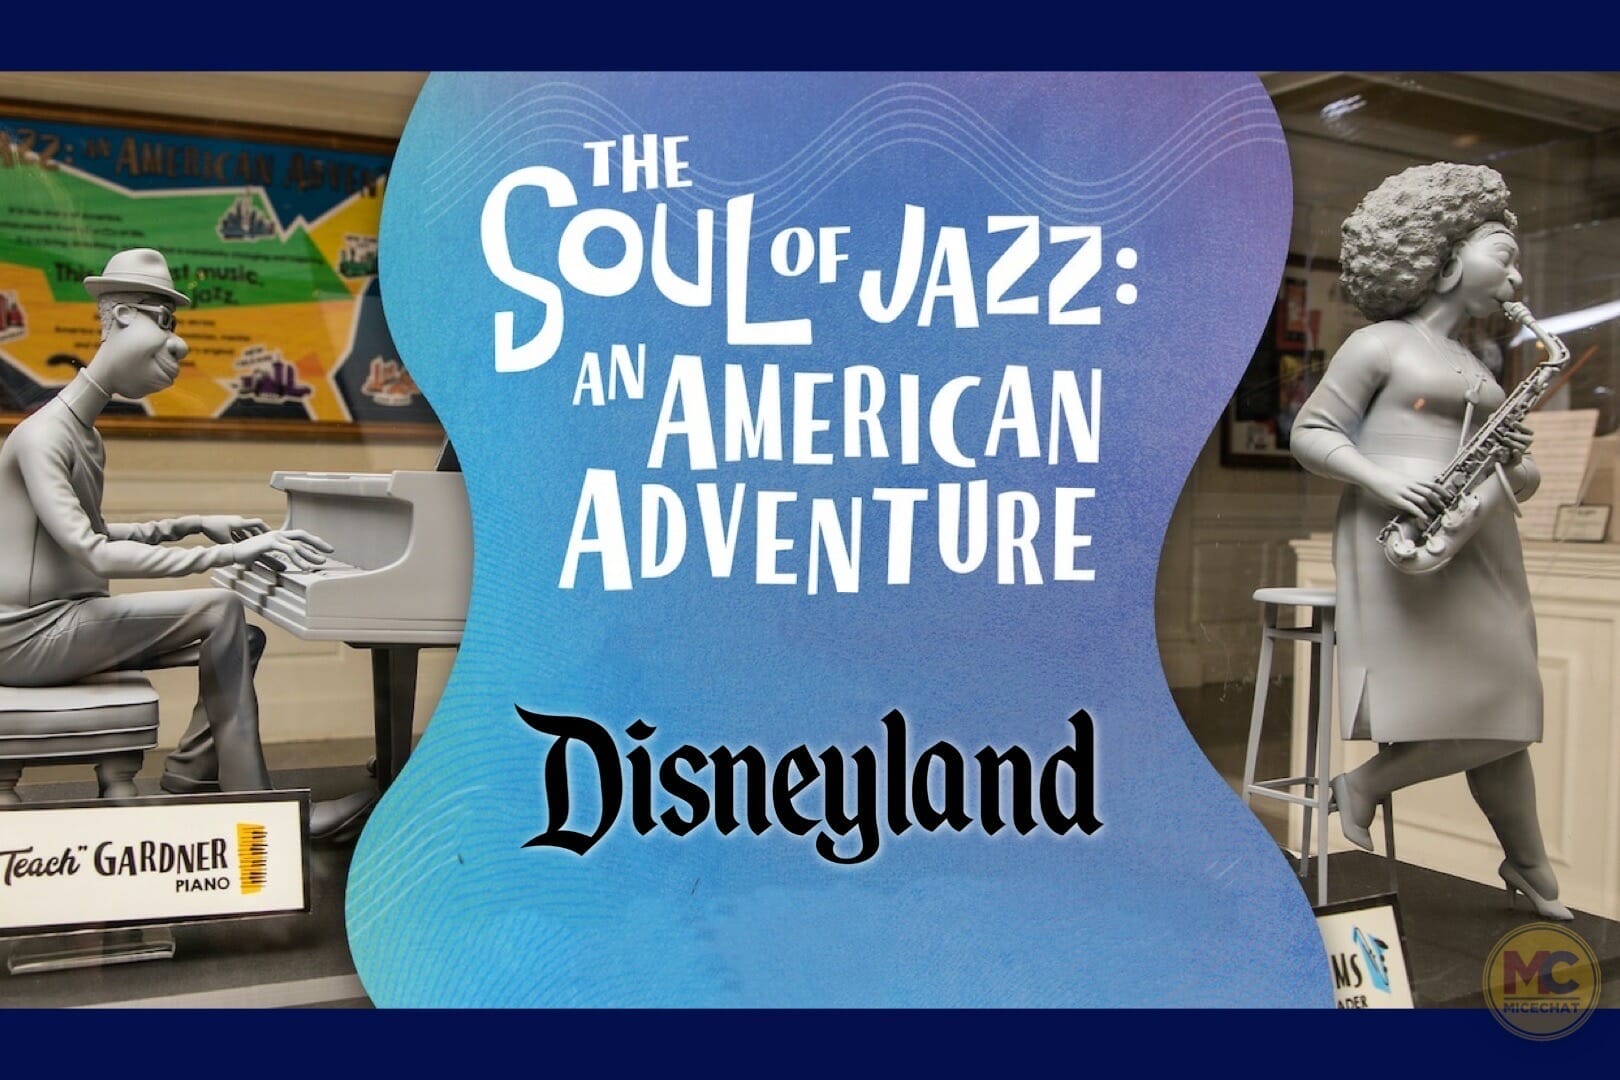 Celebrate Soulfully at Disneyland with new “Soul of Jazz” exhibit and more!